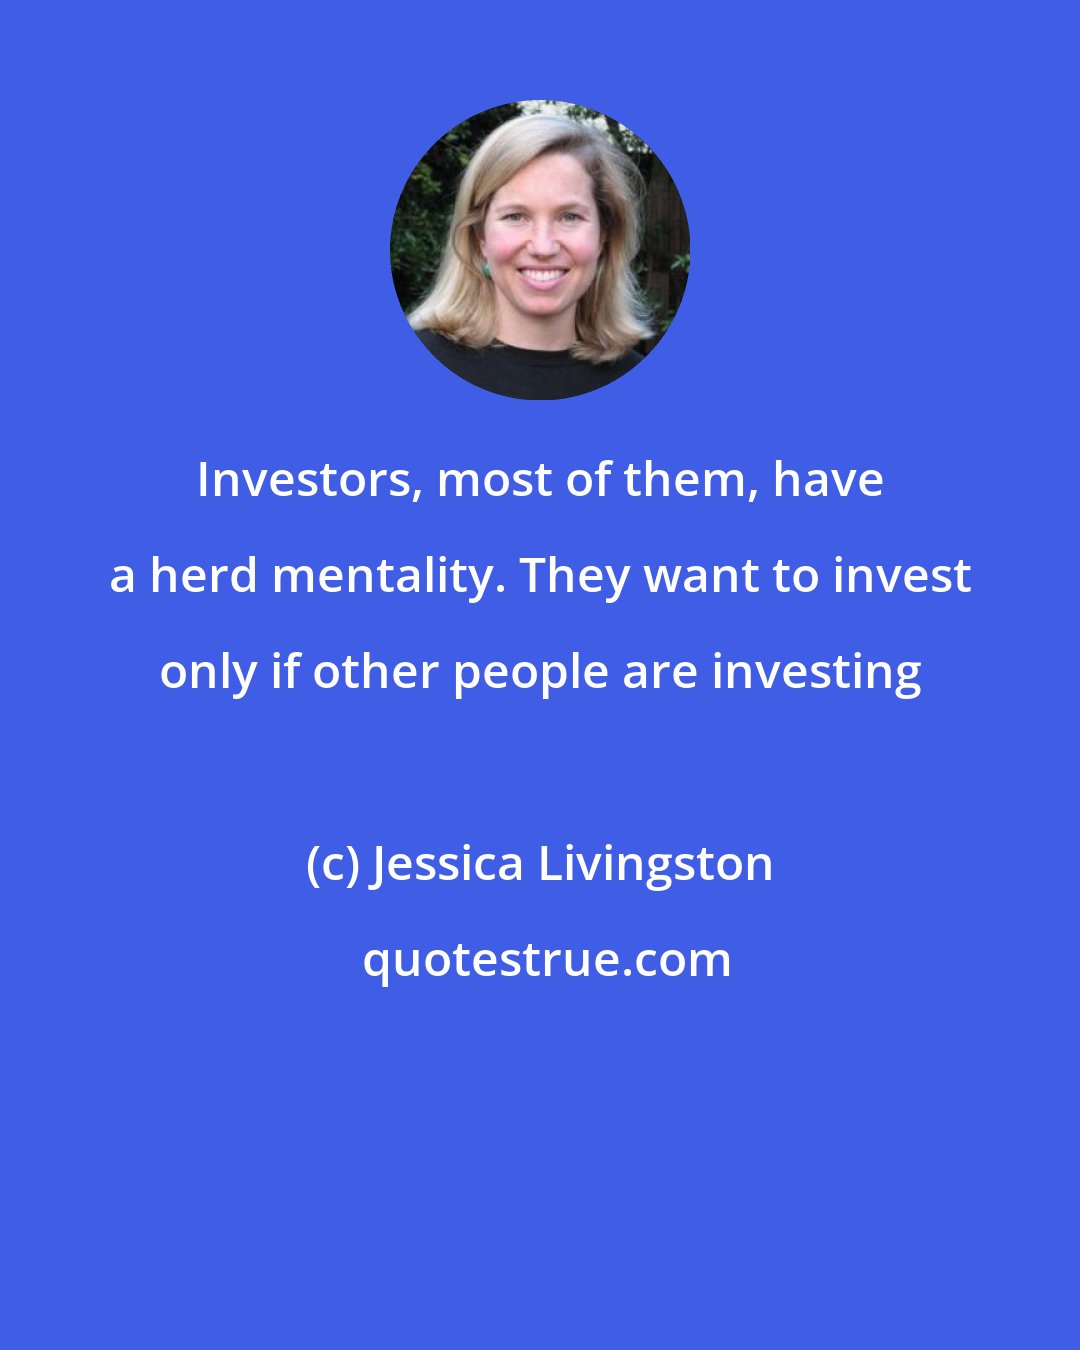 Jessica Livingston: Investors, most of them, have a herd mentality. They want to invest only if other people are investing